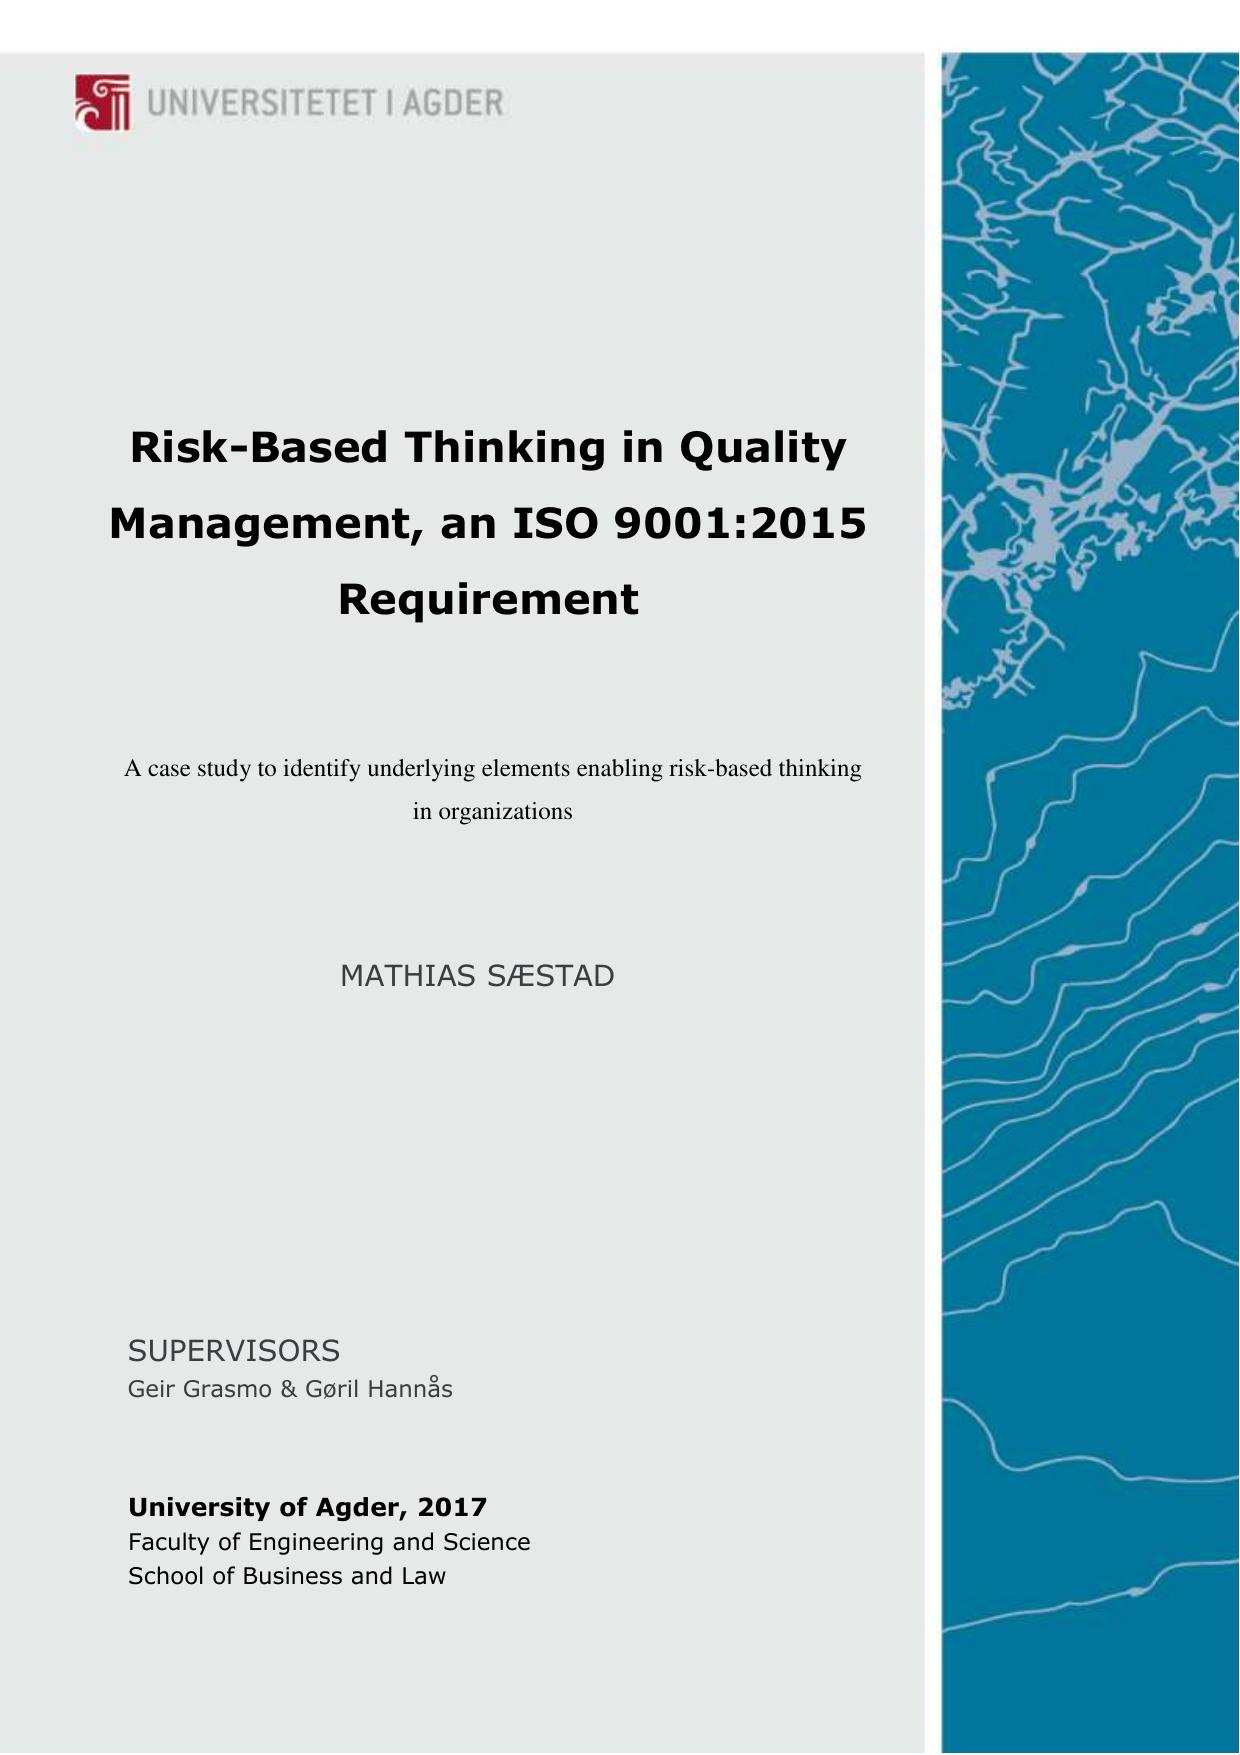 Risk-Based Thinking in Quality Management, an ISO 9001 2015 Requirement